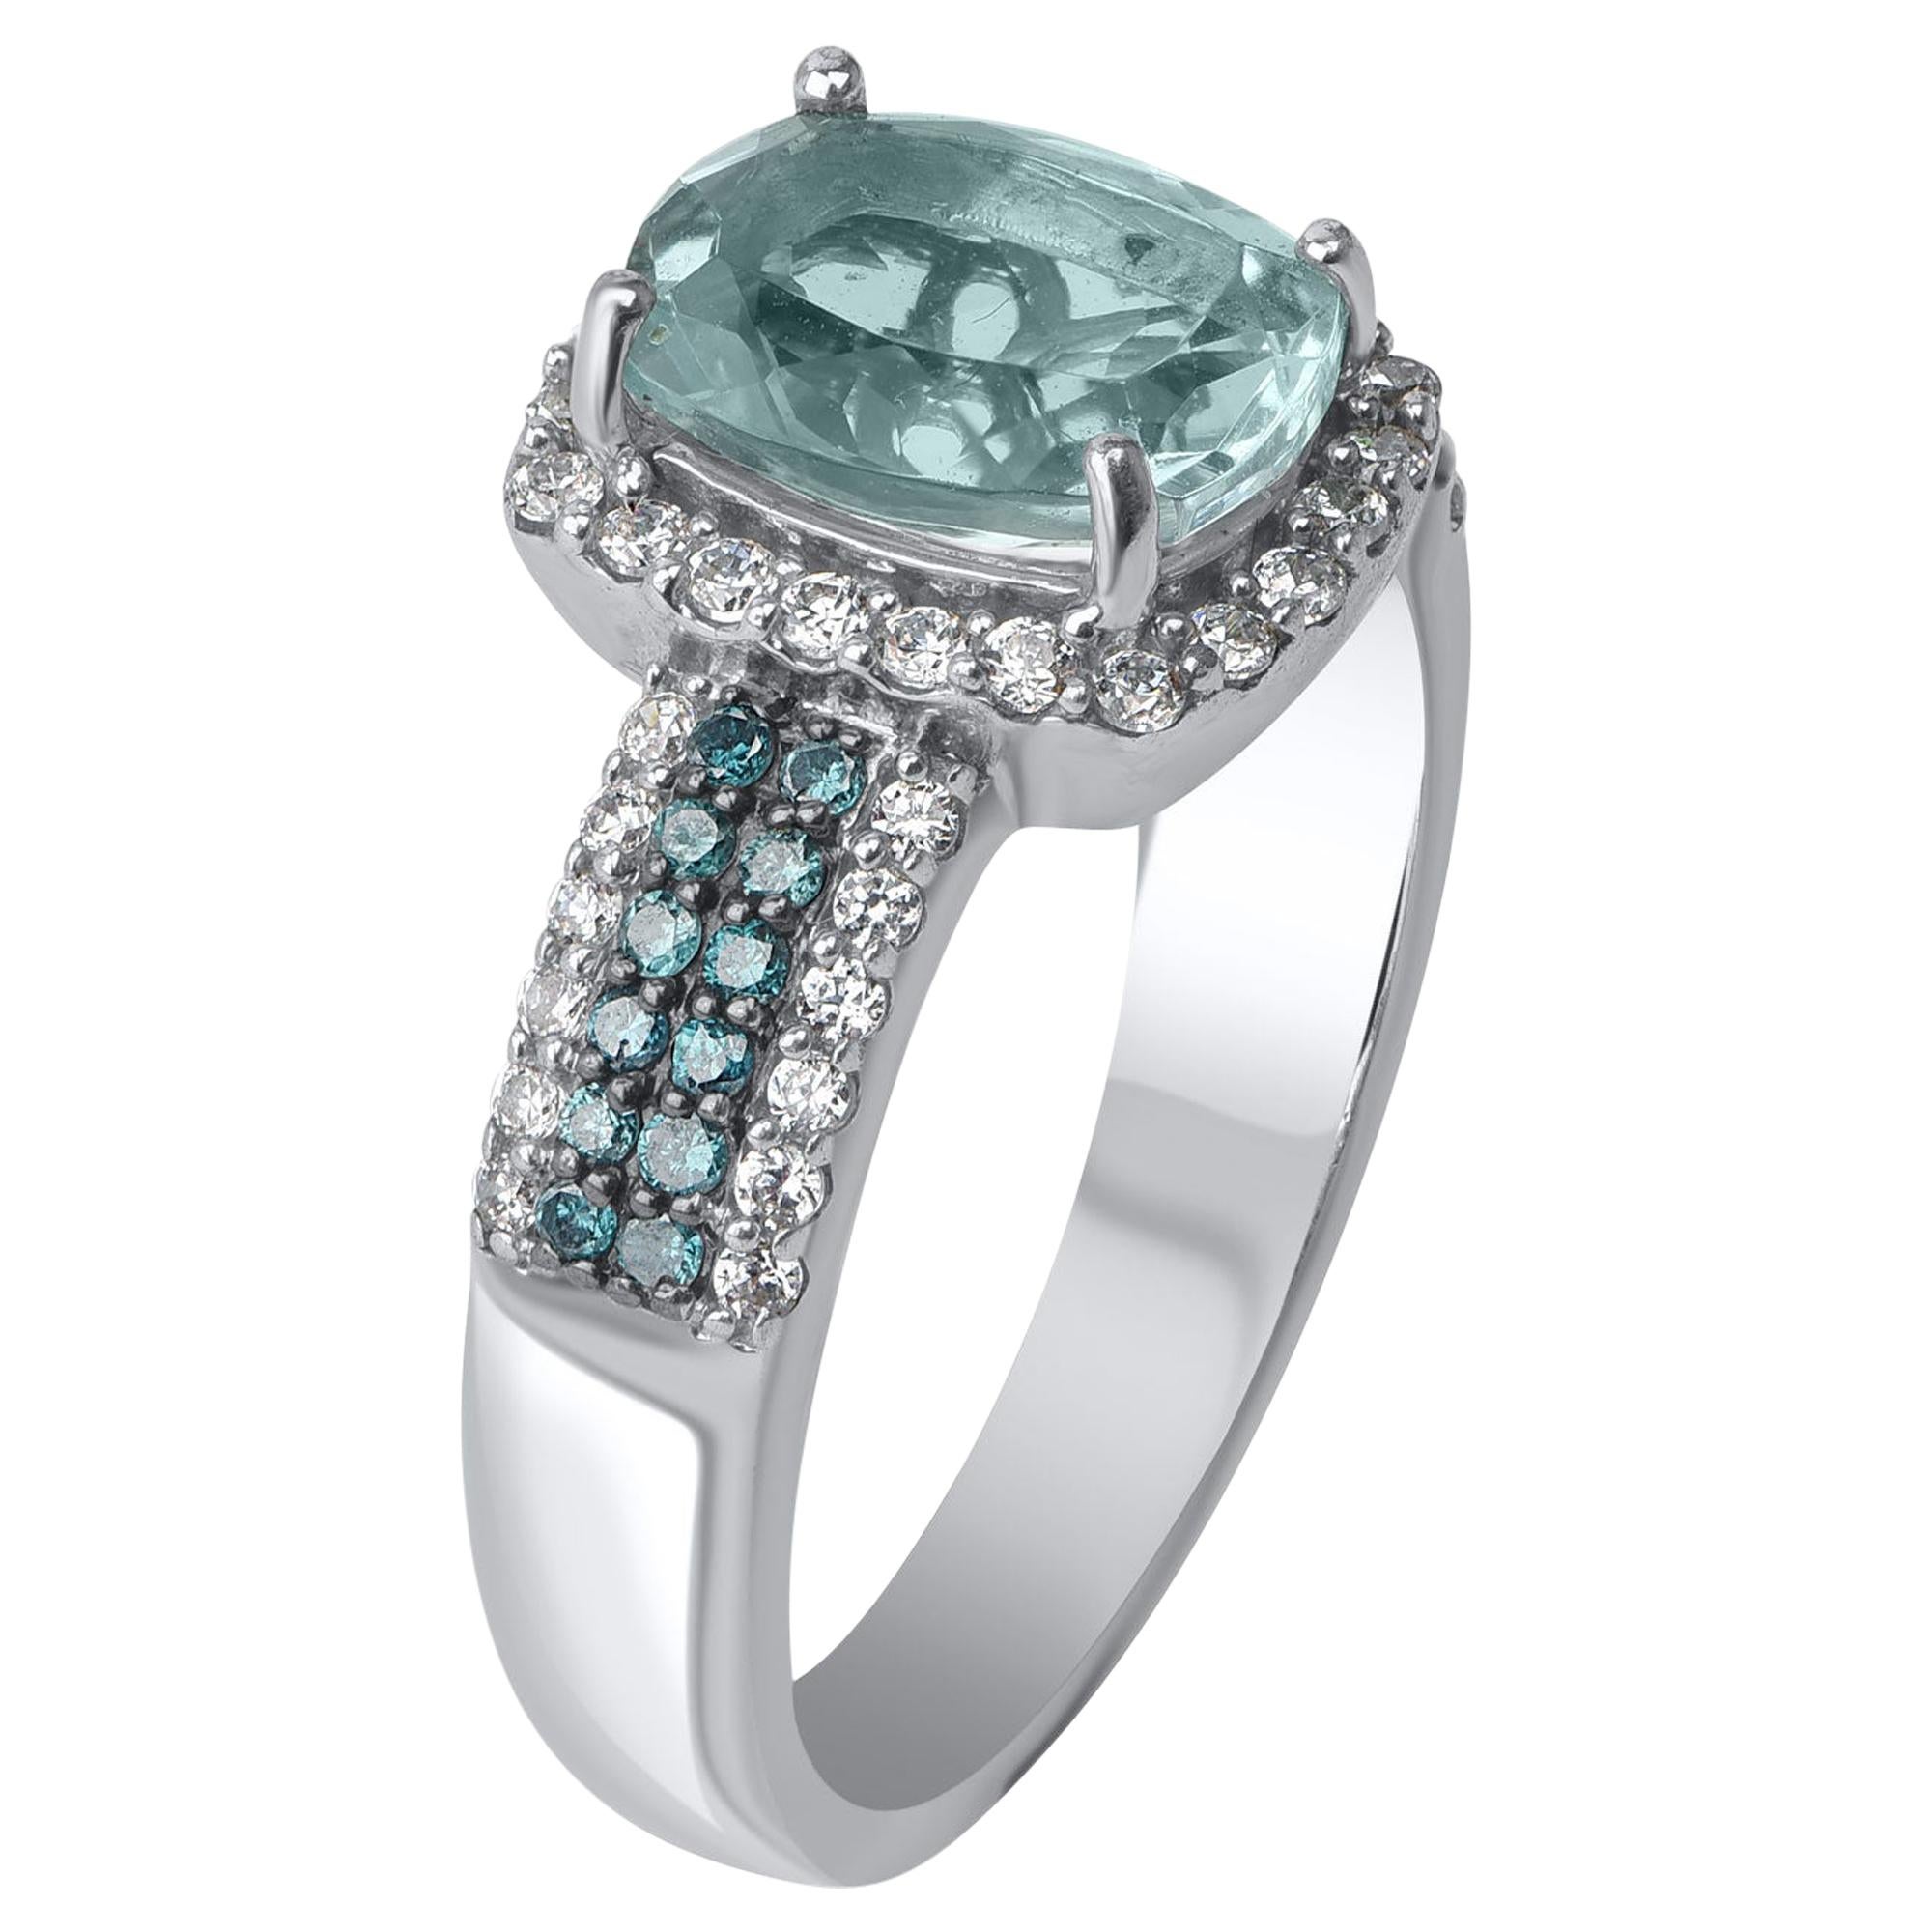 Handcrafted by our in-house experts in 14-karat white gold and embellished with 46 brilliant diamonds, 1 aqua marine gemstone and 24 treated blue diamonds in pave setting. The diamonds are graded HI color, I2 clarity. 

Current size of the ring is